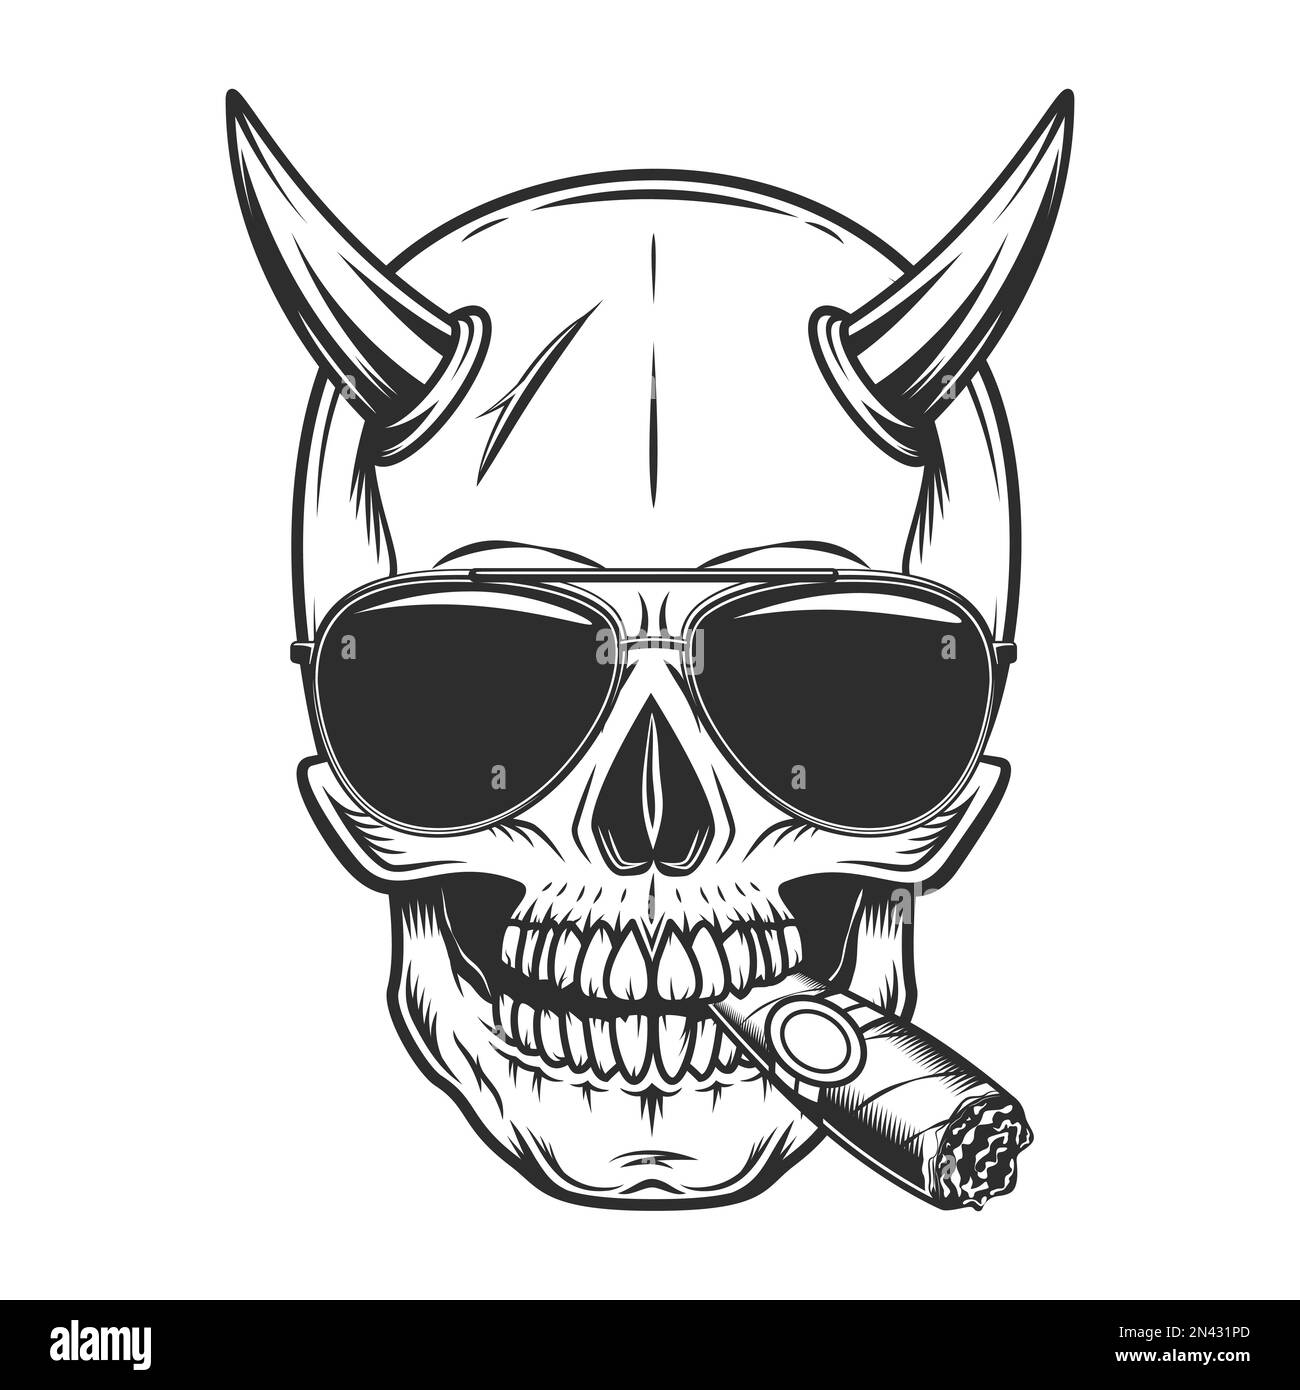 Skull with horn smoking cigar or cigarette smoke with sunglasses accessory to protect eyes from bright sun vintage isolated vector illustration Stock Vector